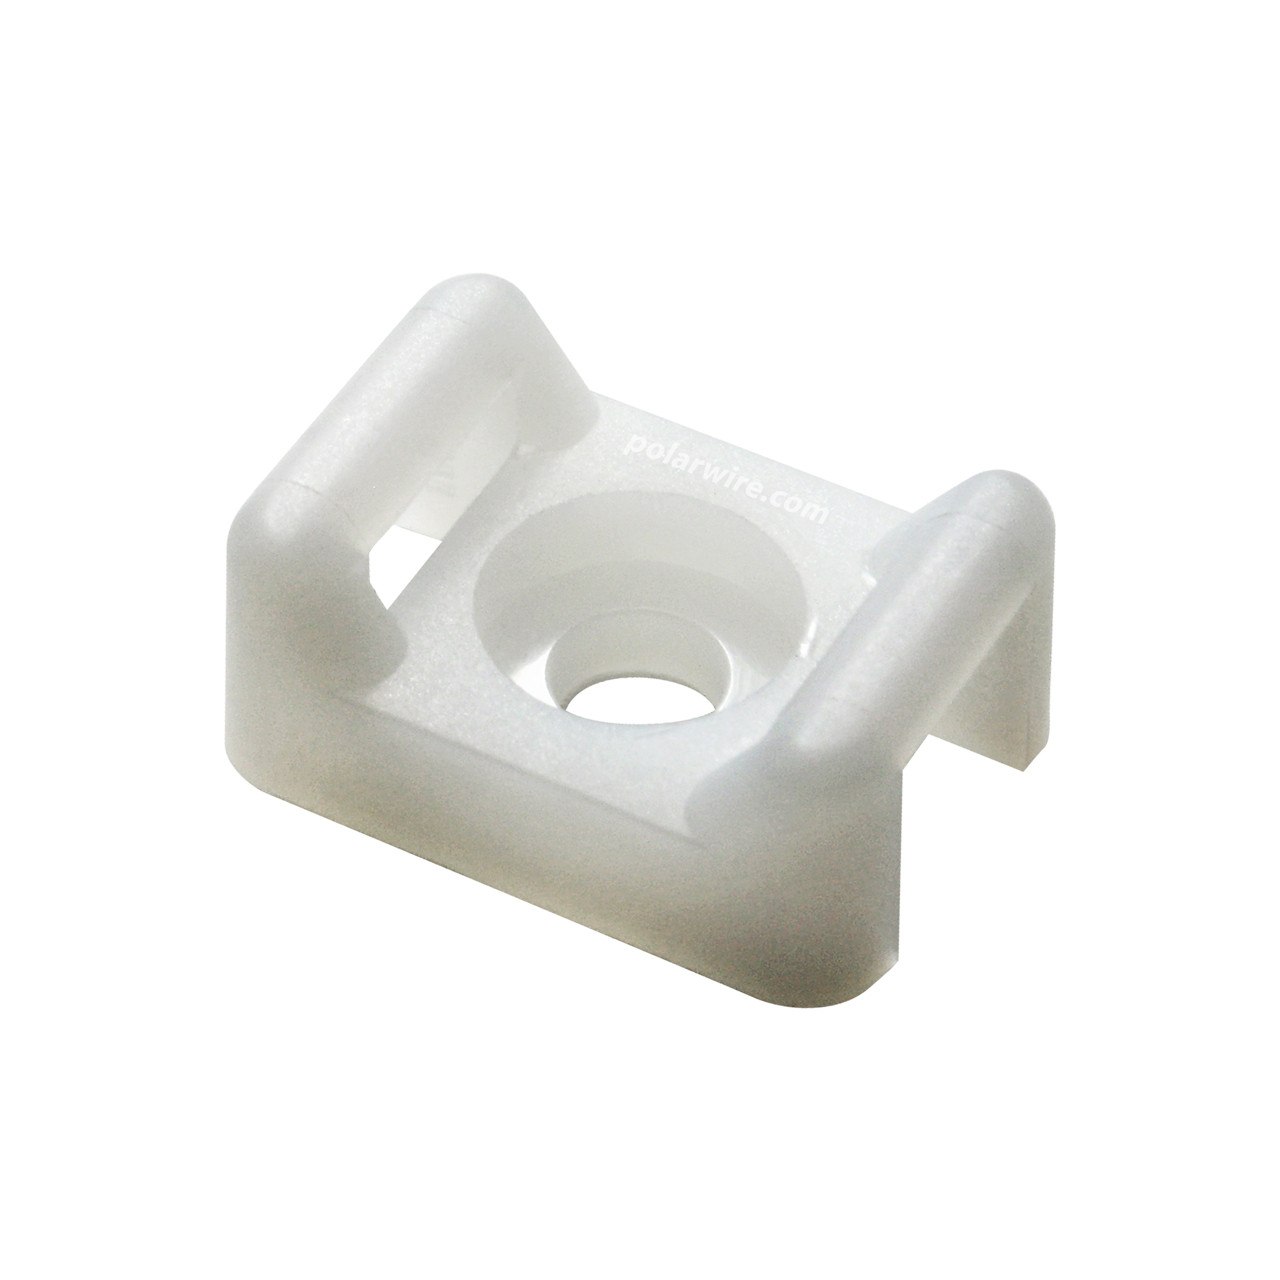 7/8 inch natural nylon 6.6 cable tie saddle mount - screw applied, 18-120 pound pull strength